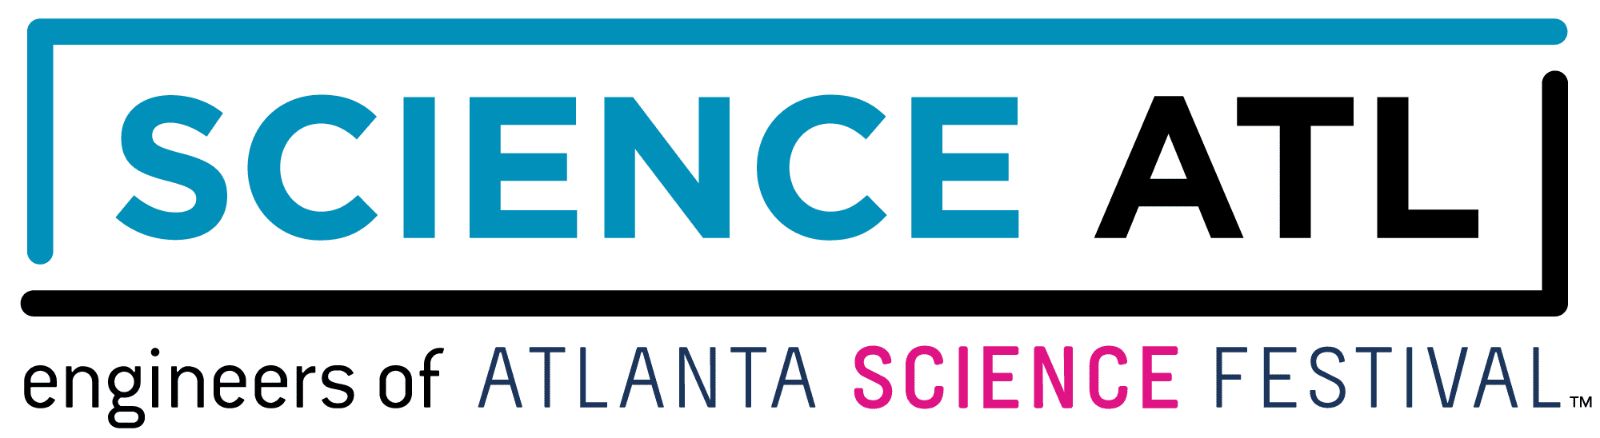 Science-ATL-Logo-with-ASF-Full-Color.jpg